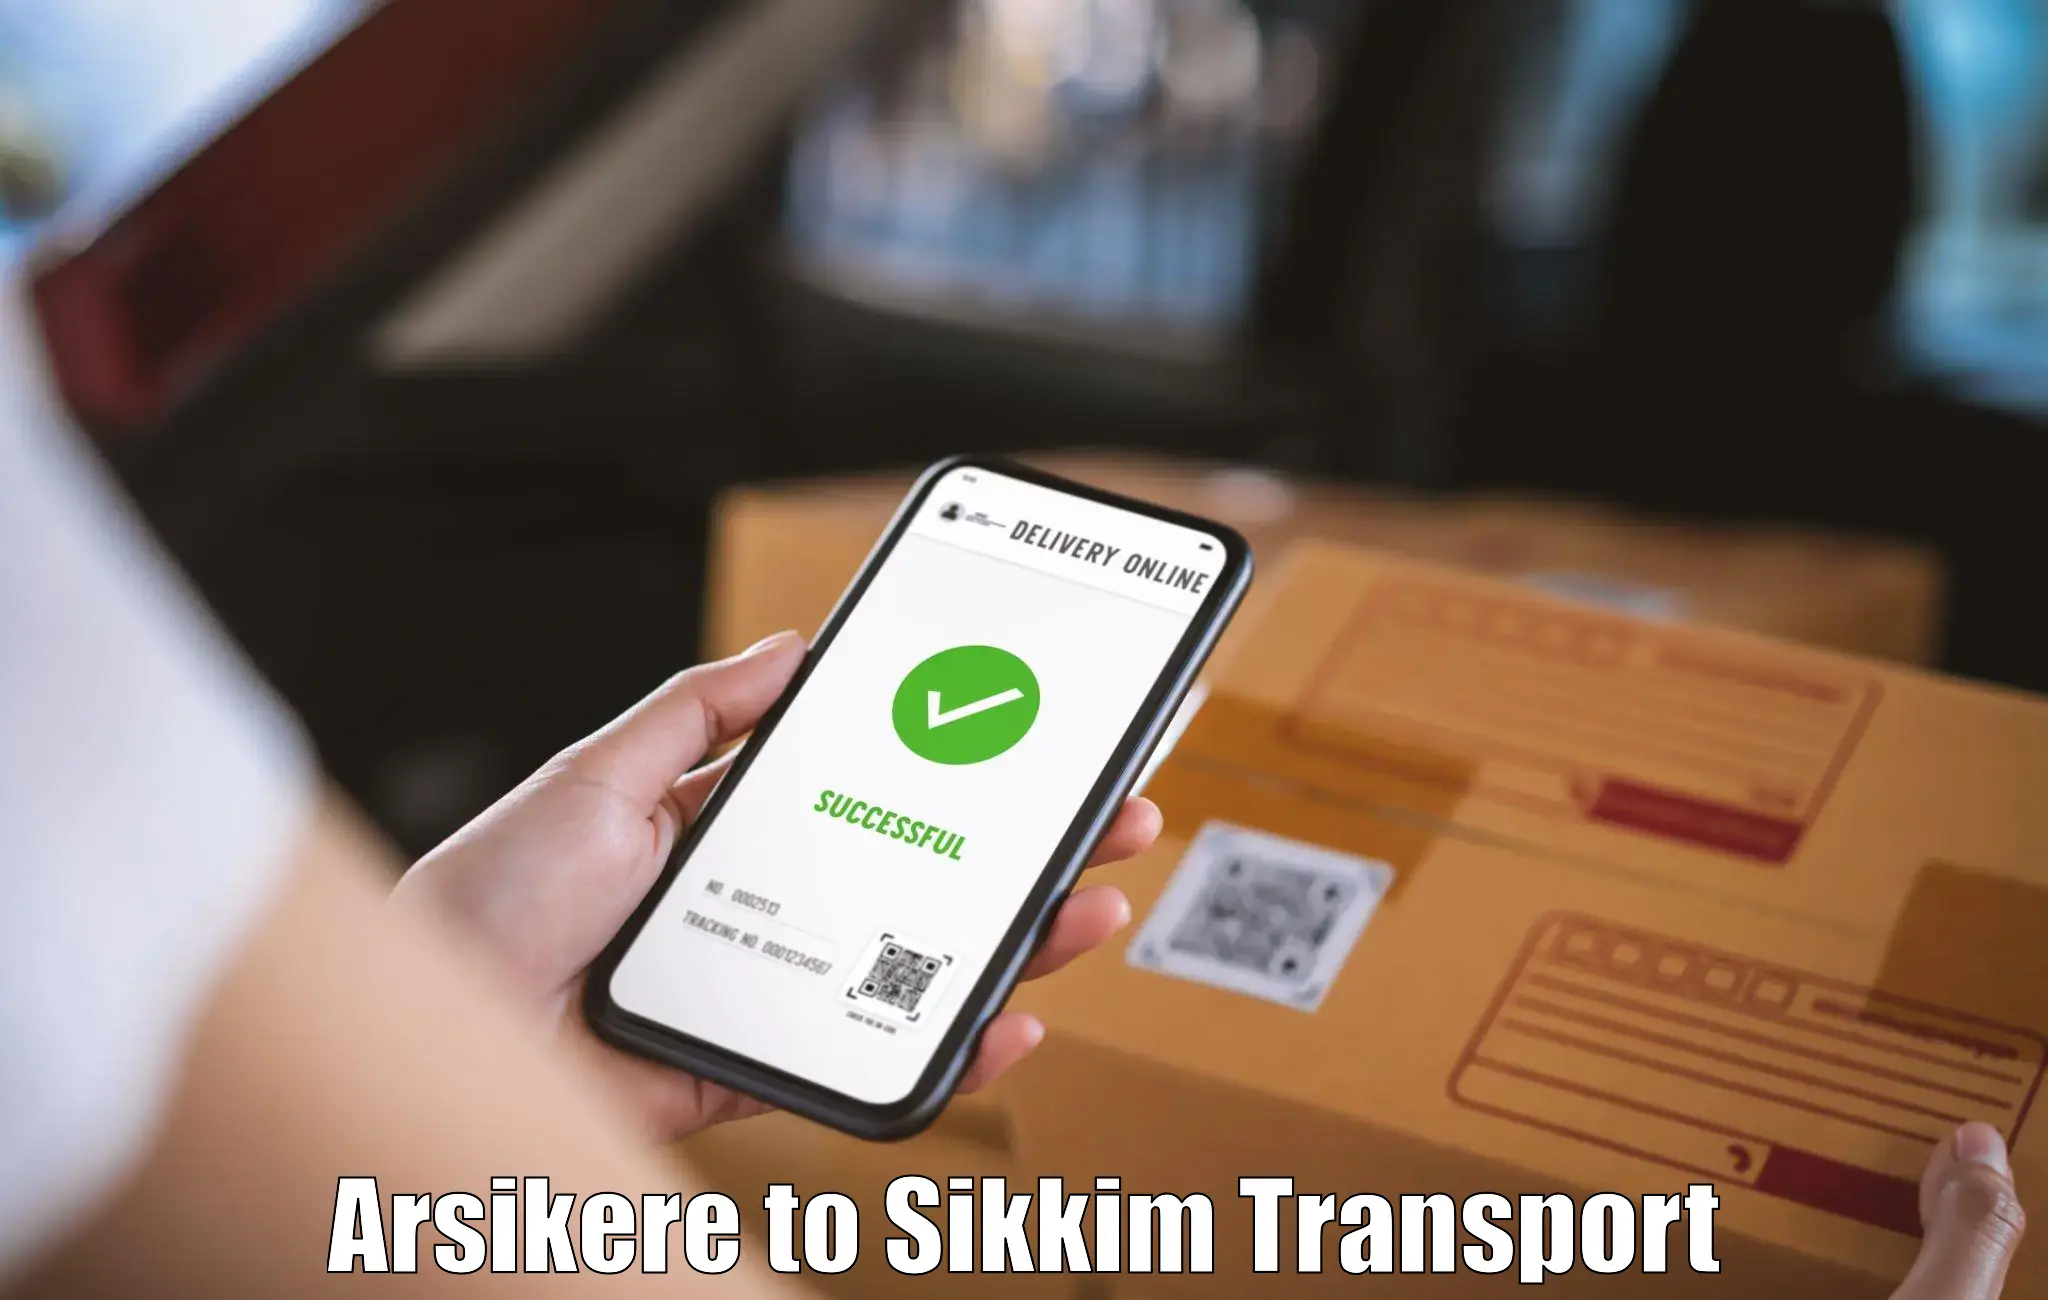 Inland transportation services Arsikere to Pelling